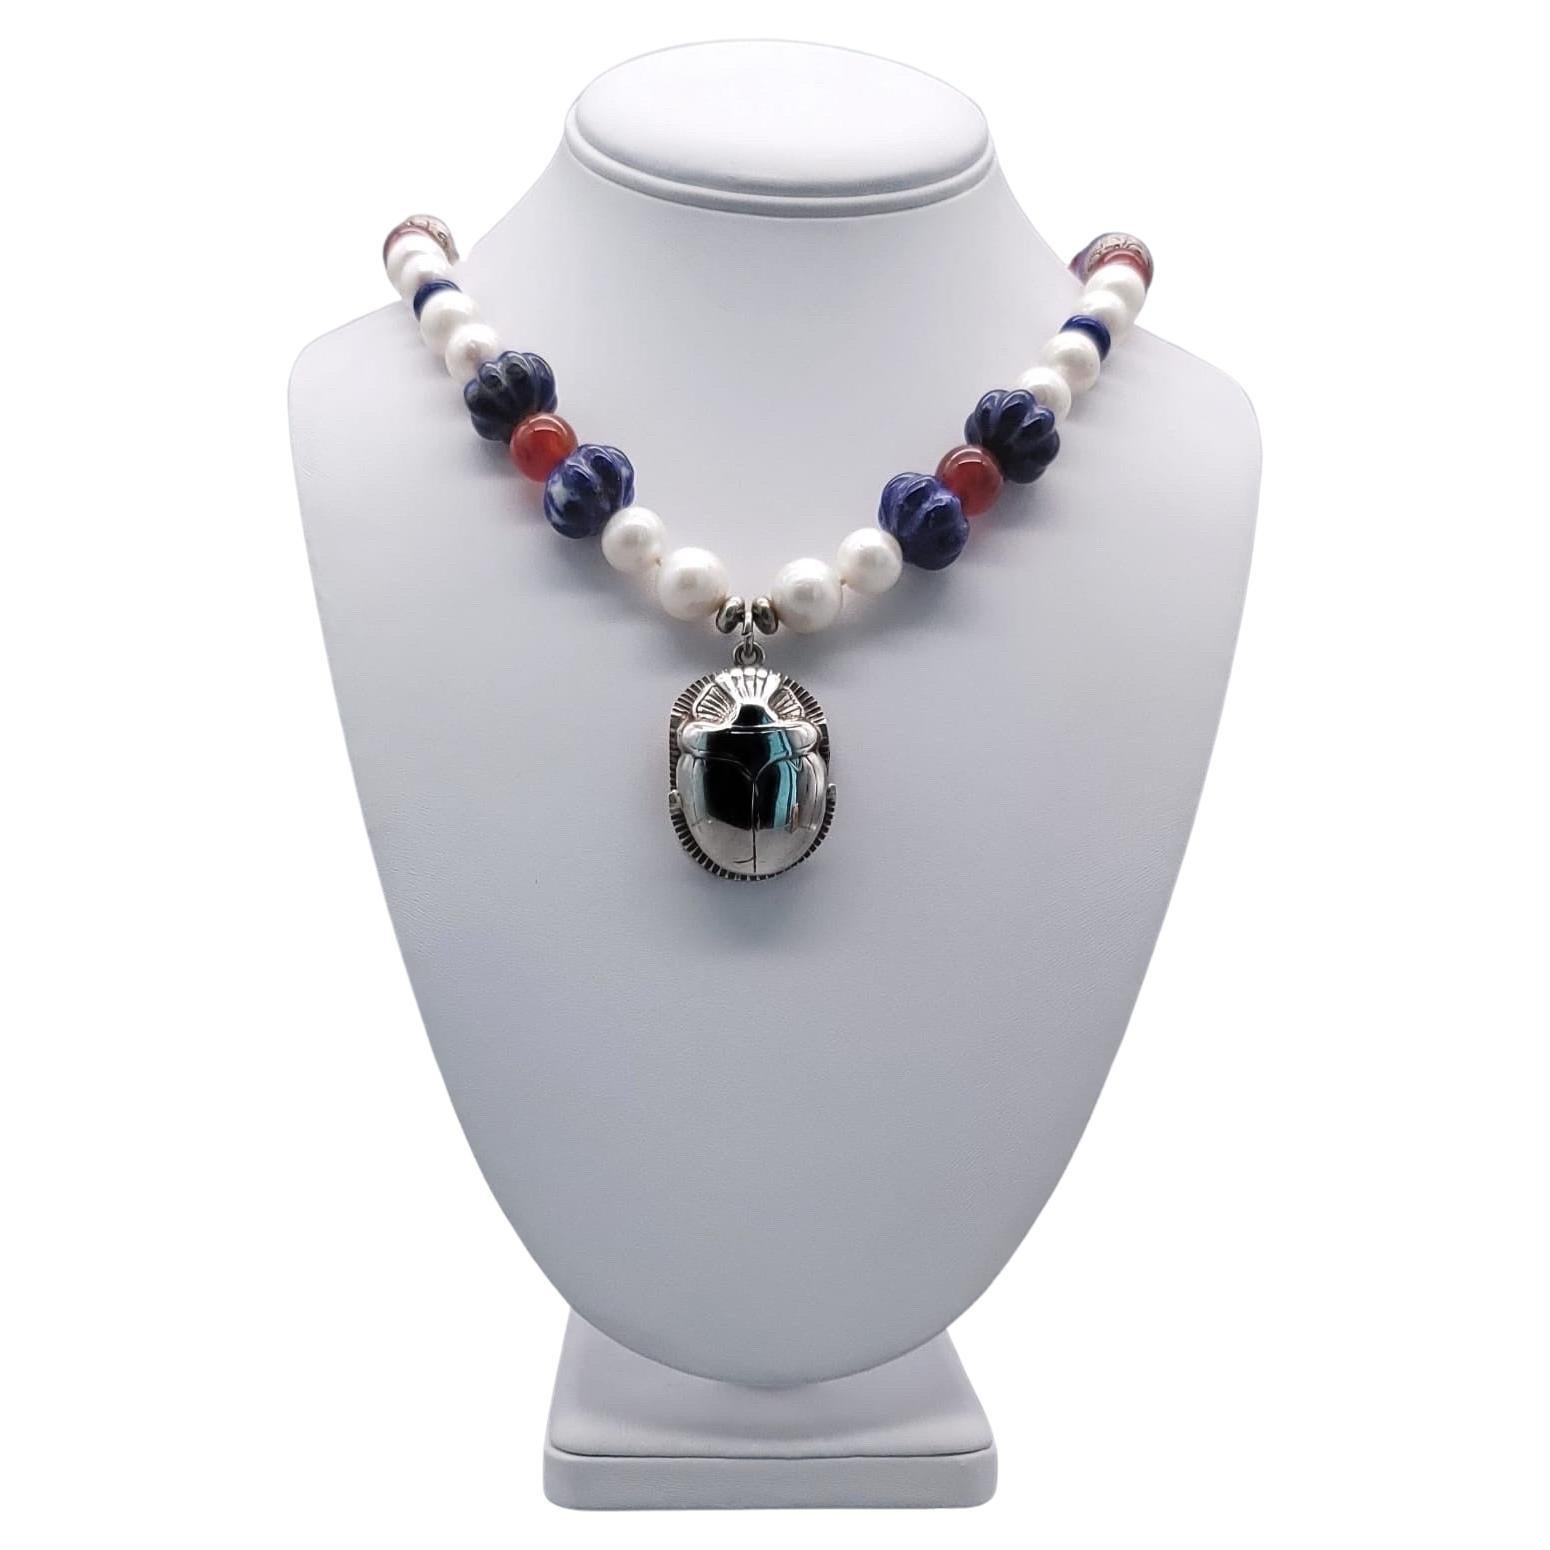 A.Jeschel  Freshwater Pearl and Lapis necklace with a silver scarab pendant.